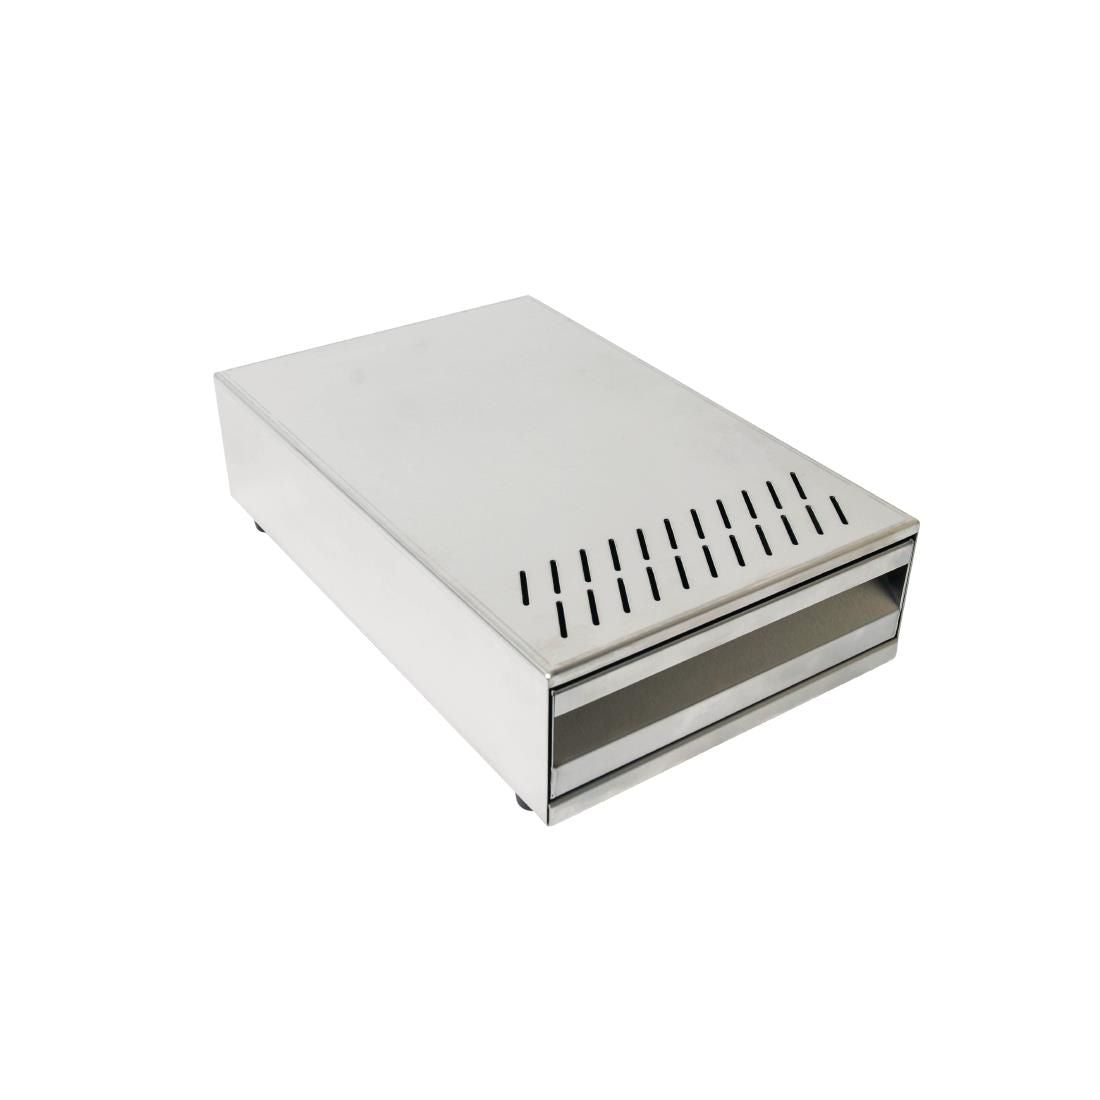 HC559 Premium Stainless Steel Knock Out Box